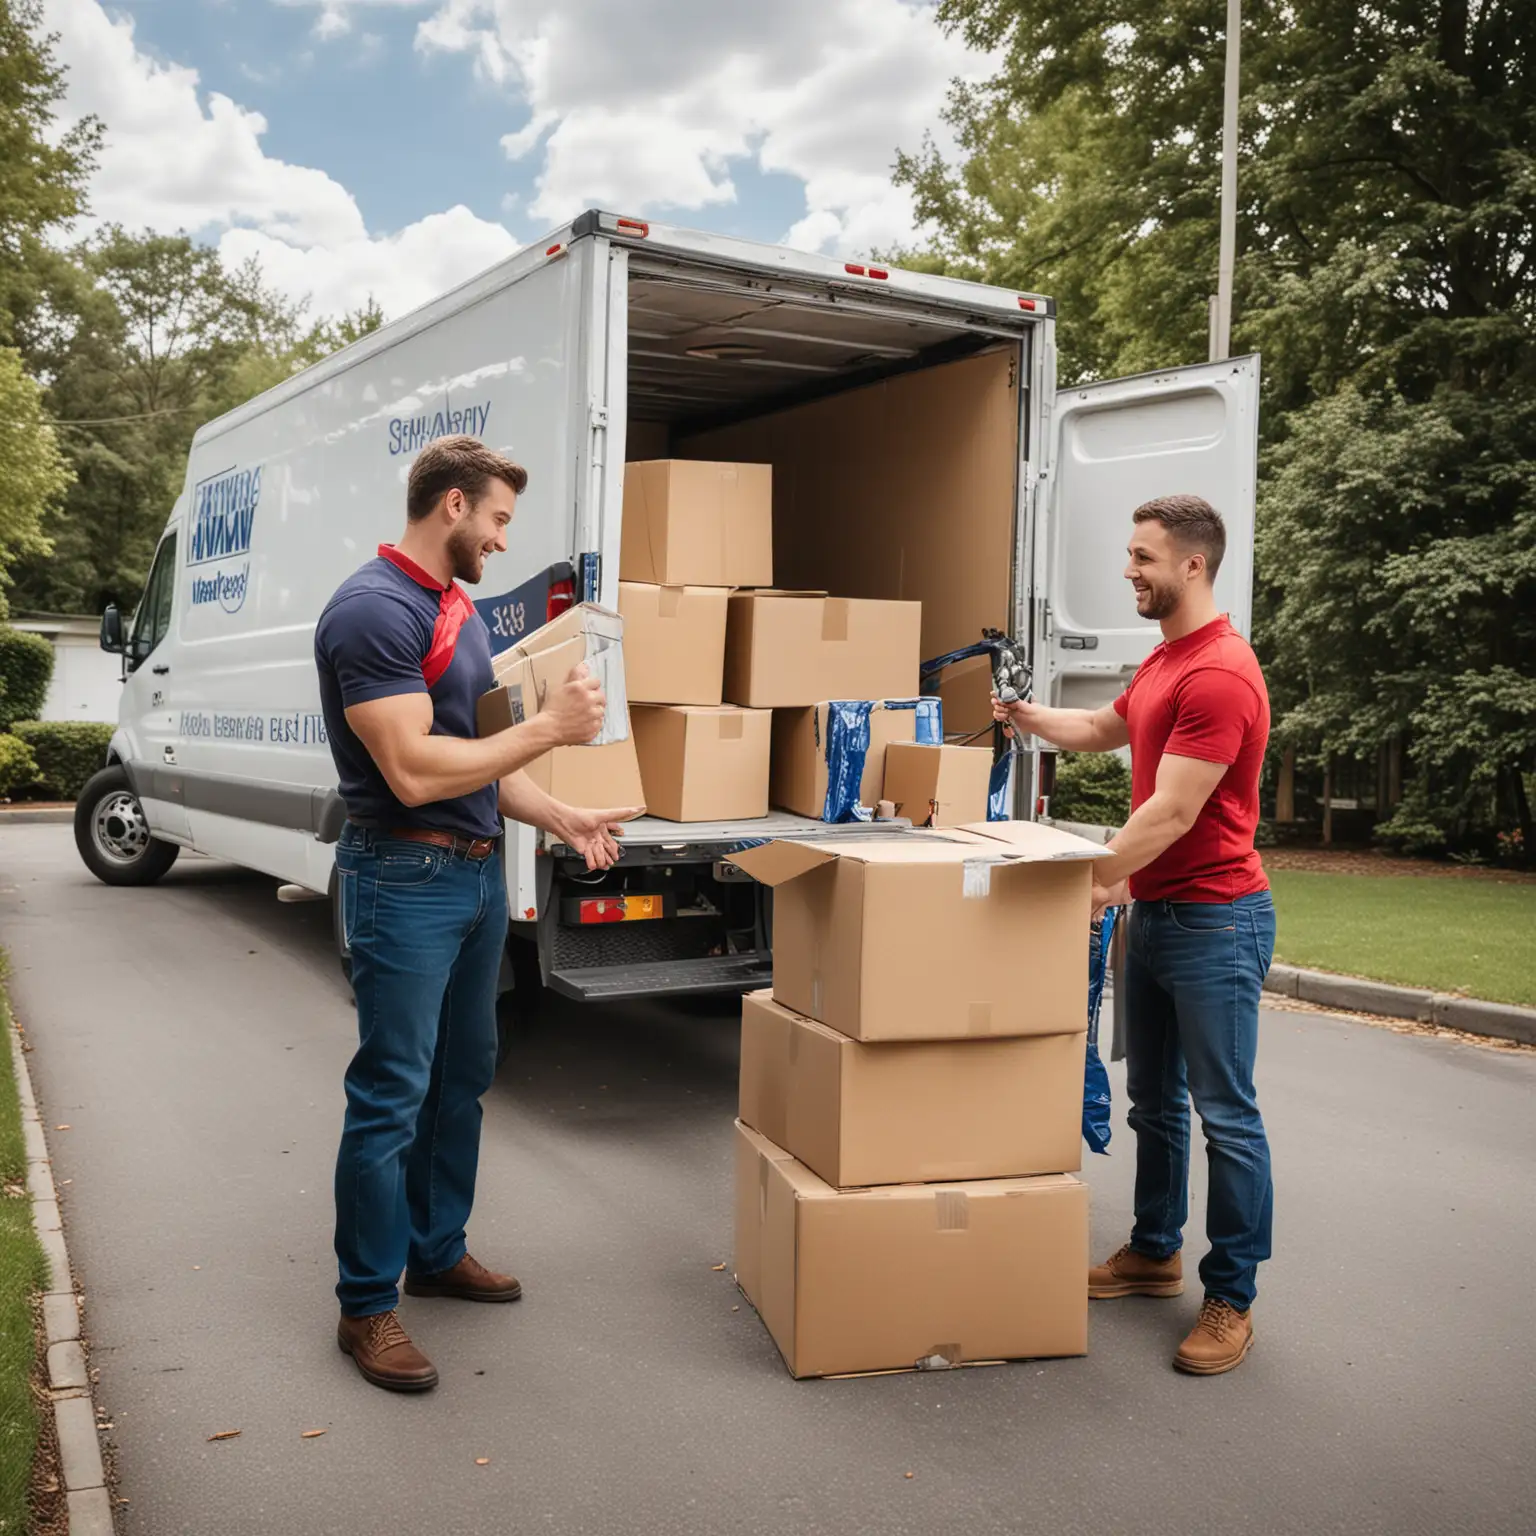 Create a moving company images for fb social media post
